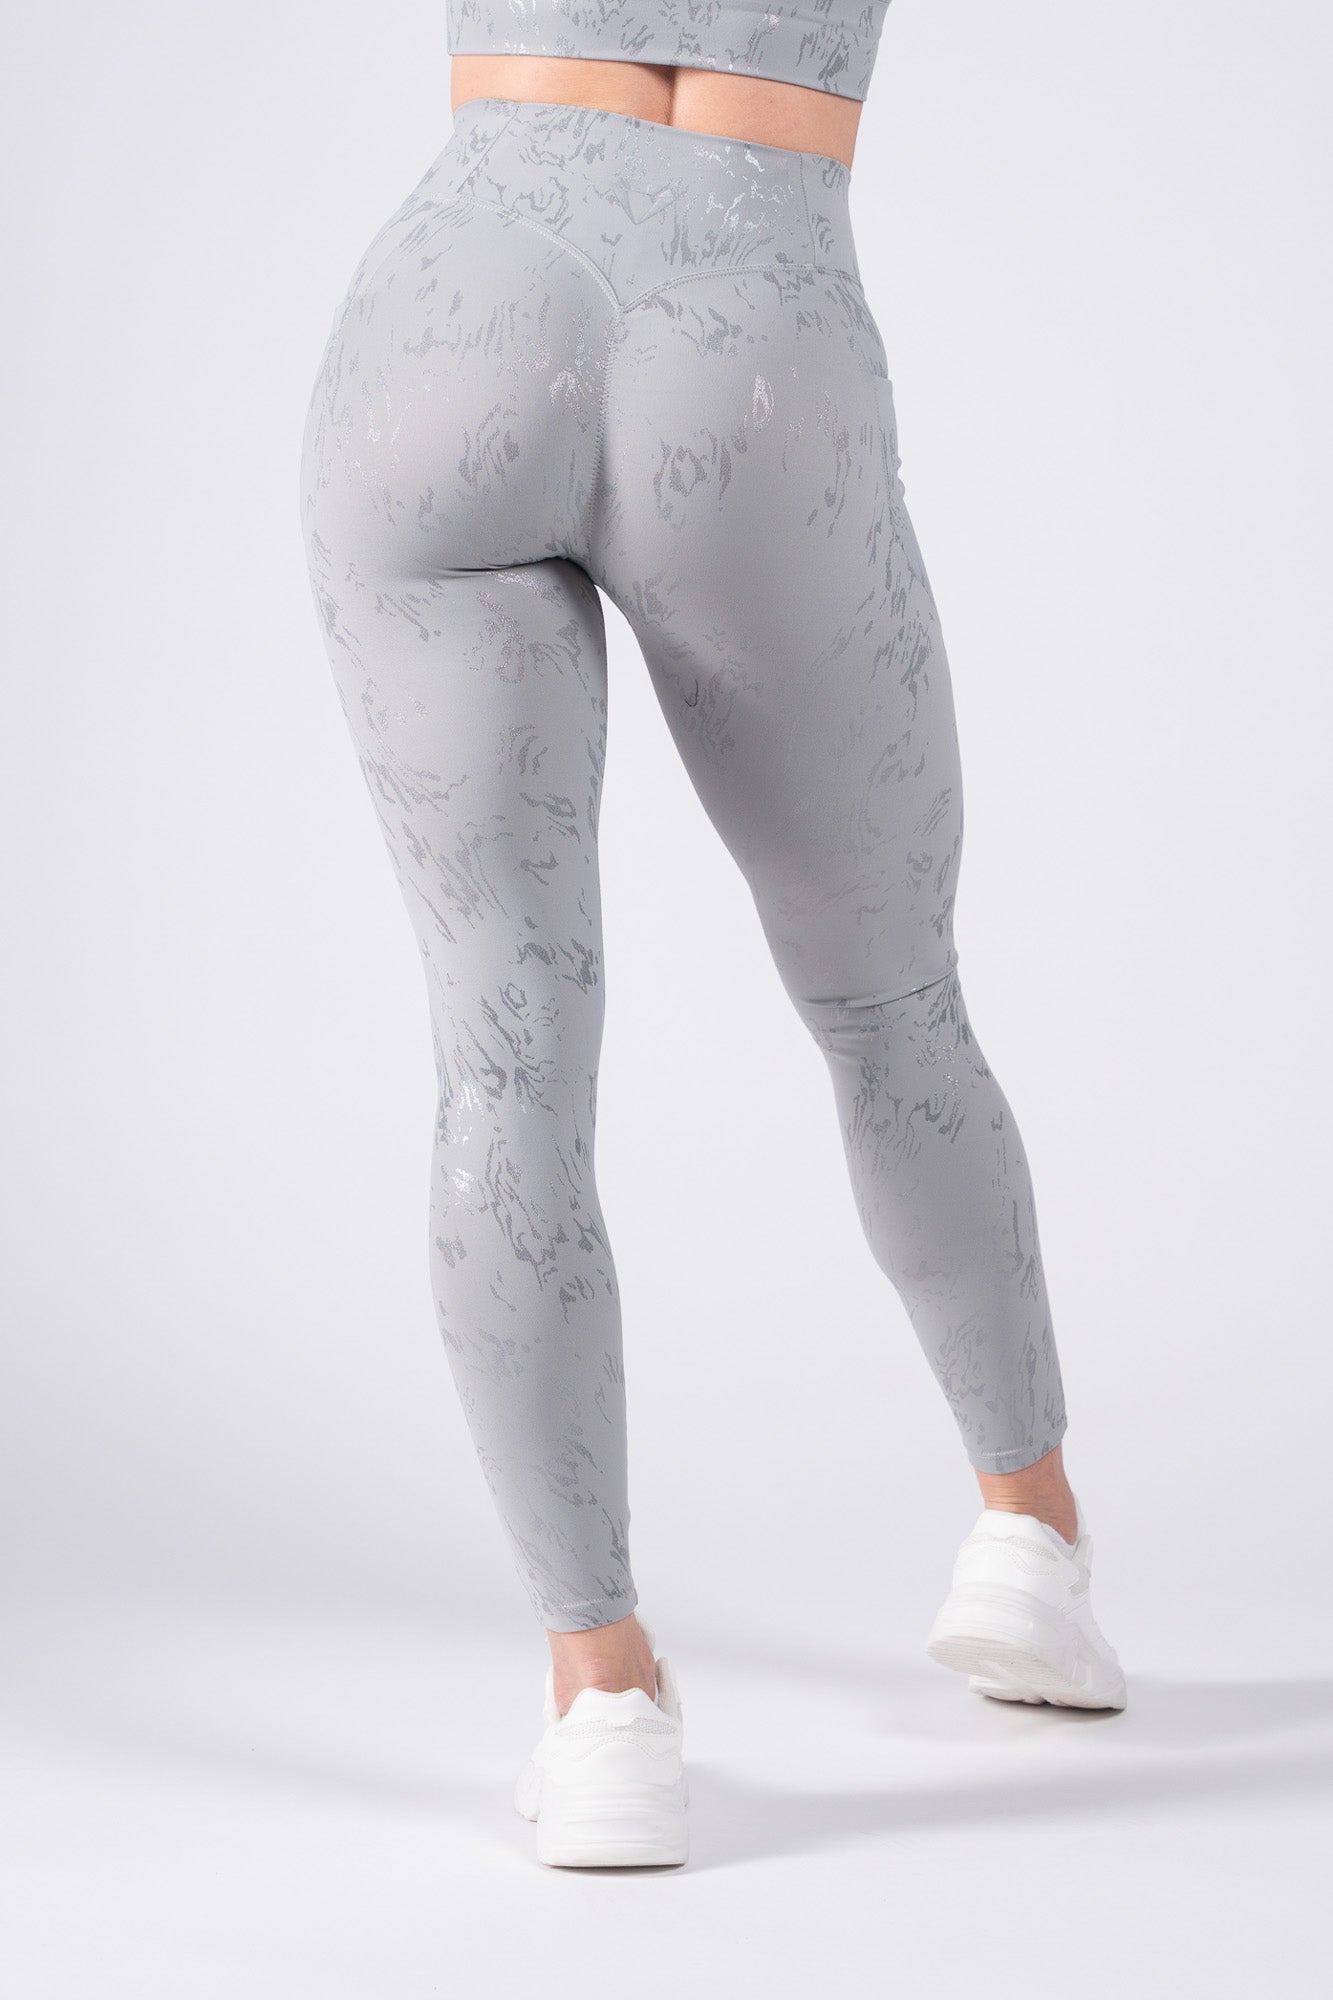 LEGGINGS SECOND SKIN - LIMITLESS EDITION